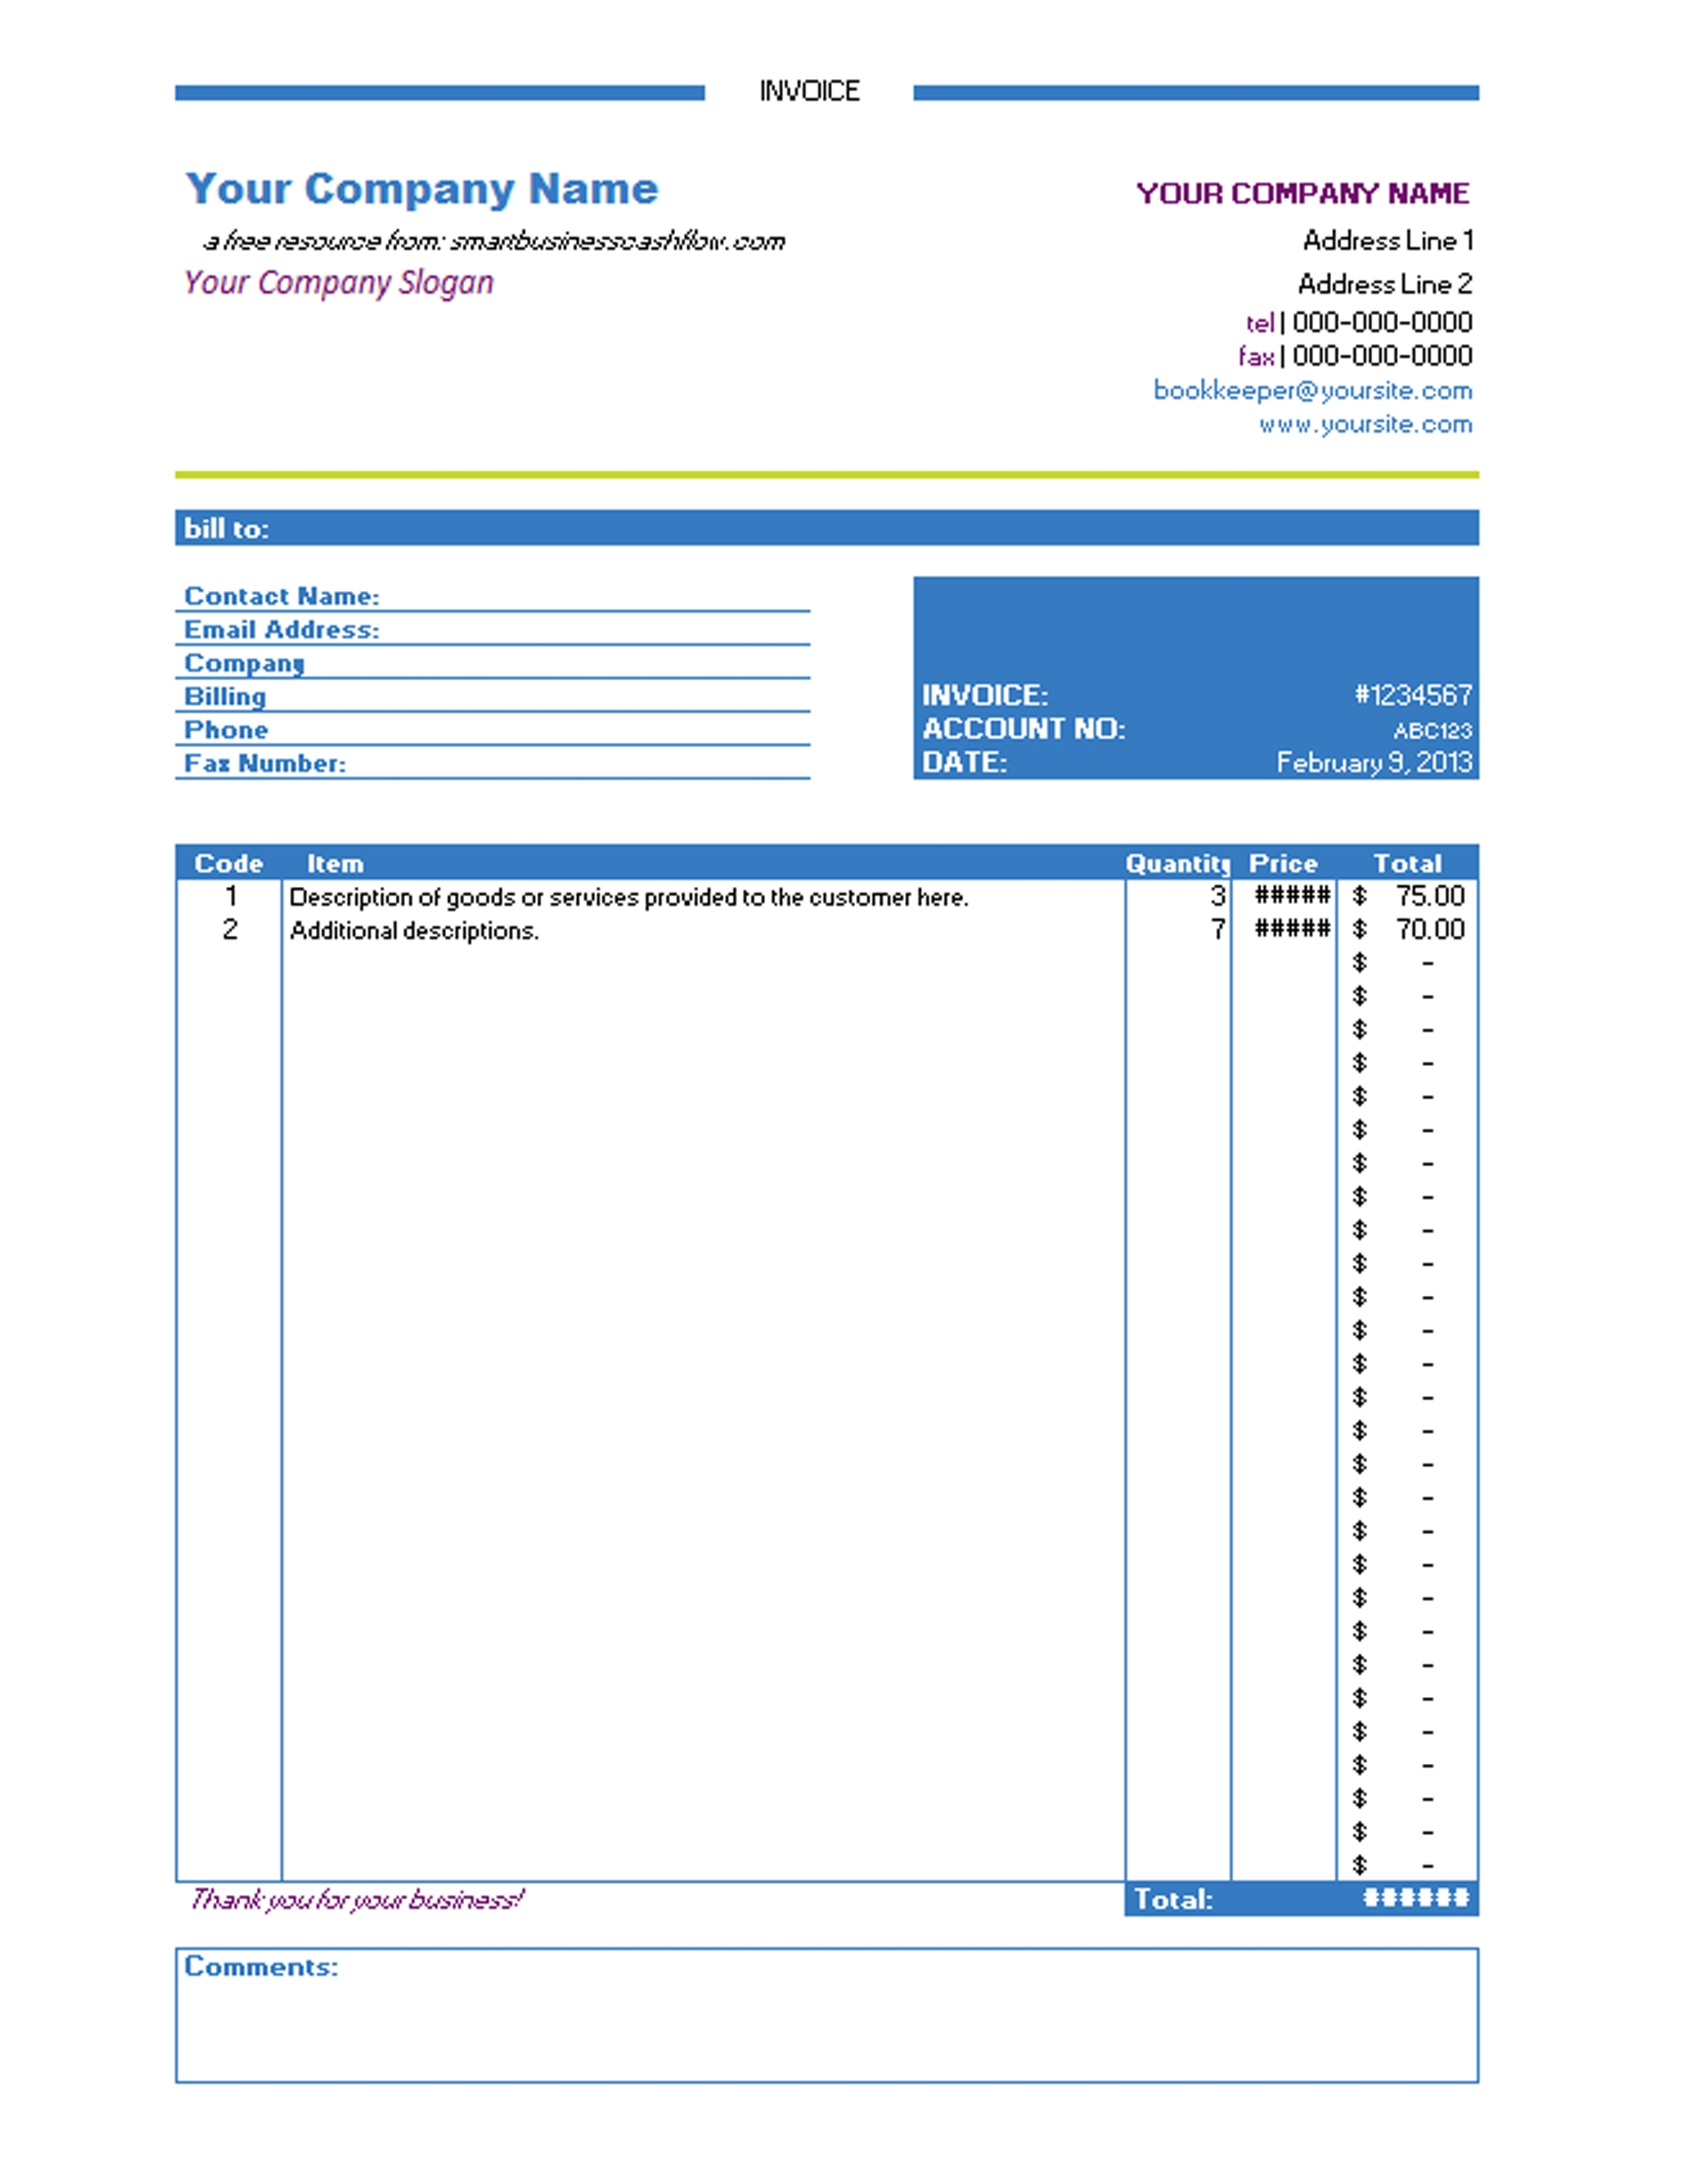 invoice templates for excel free invoice template invoice excel template free